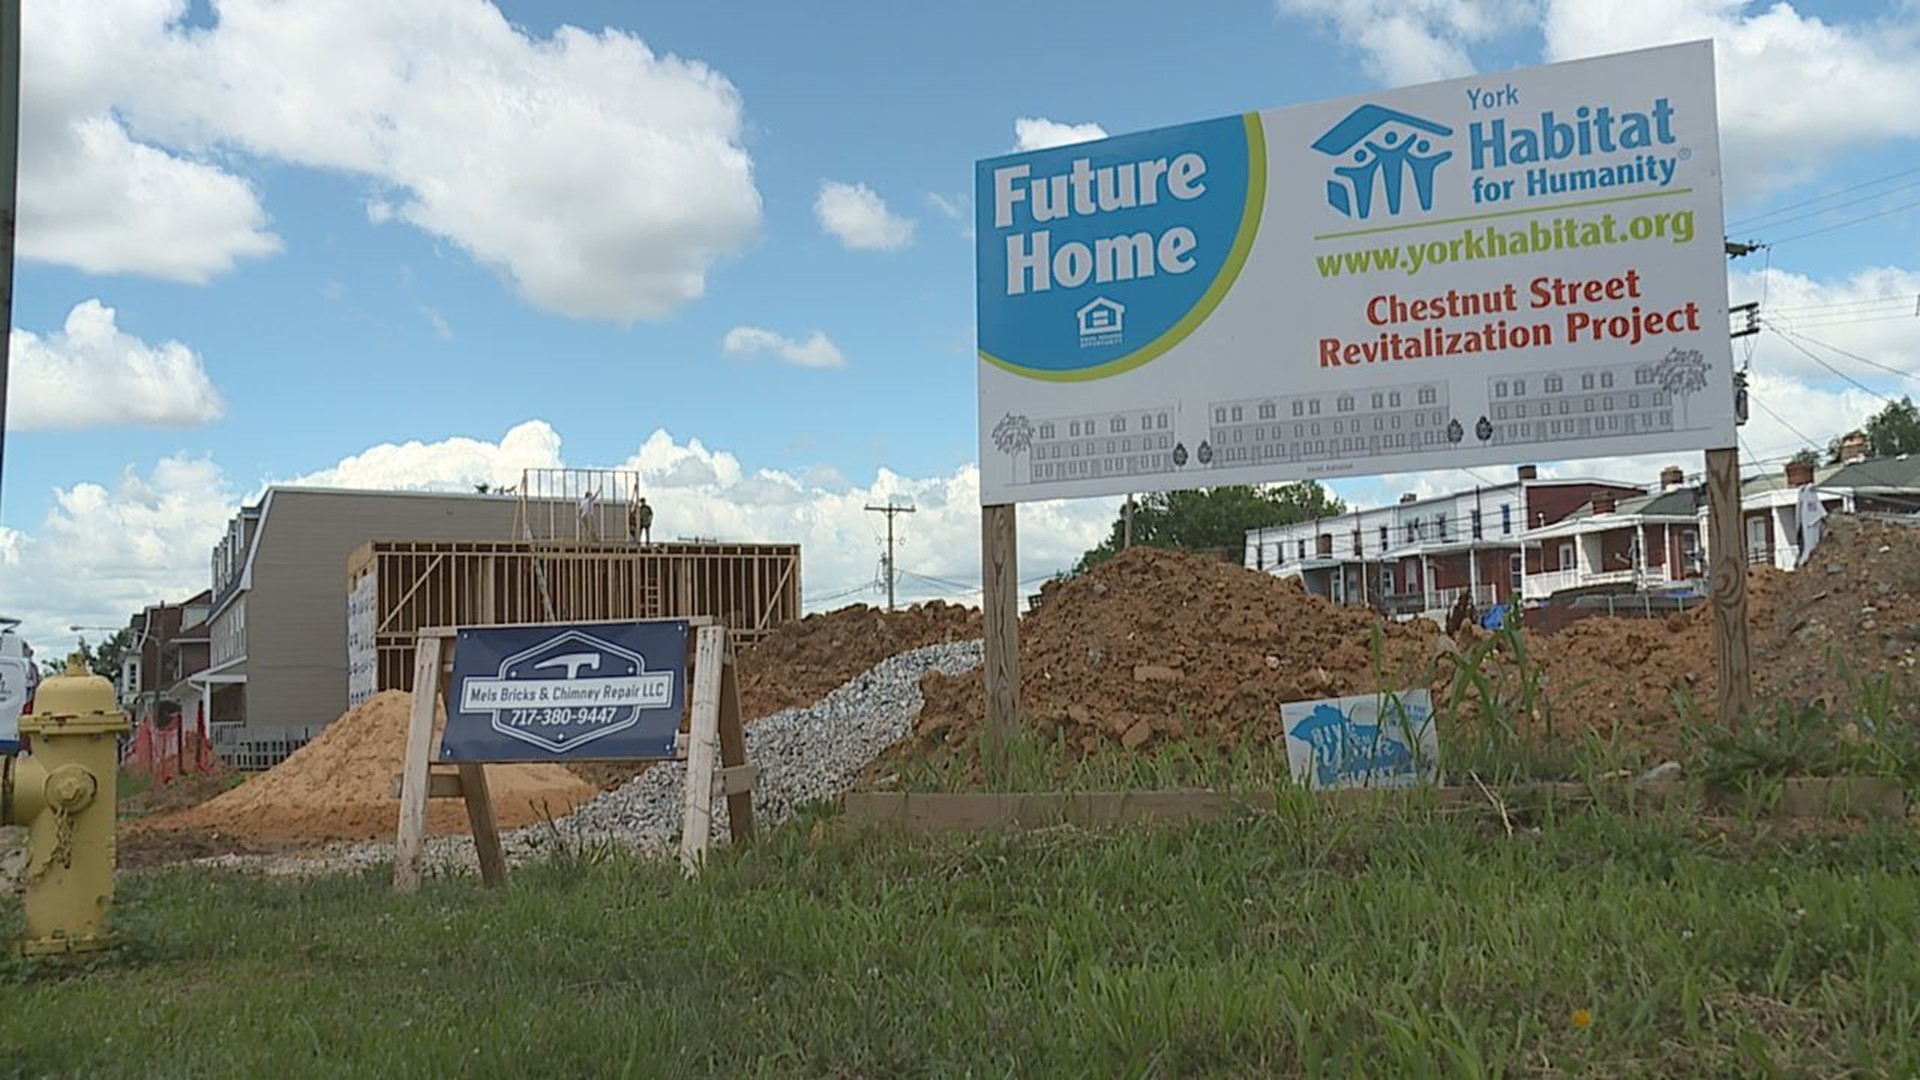 York Habitat for Humanity is building low-income housing with new homes on a York city block that was leveled by a 2009 fire.